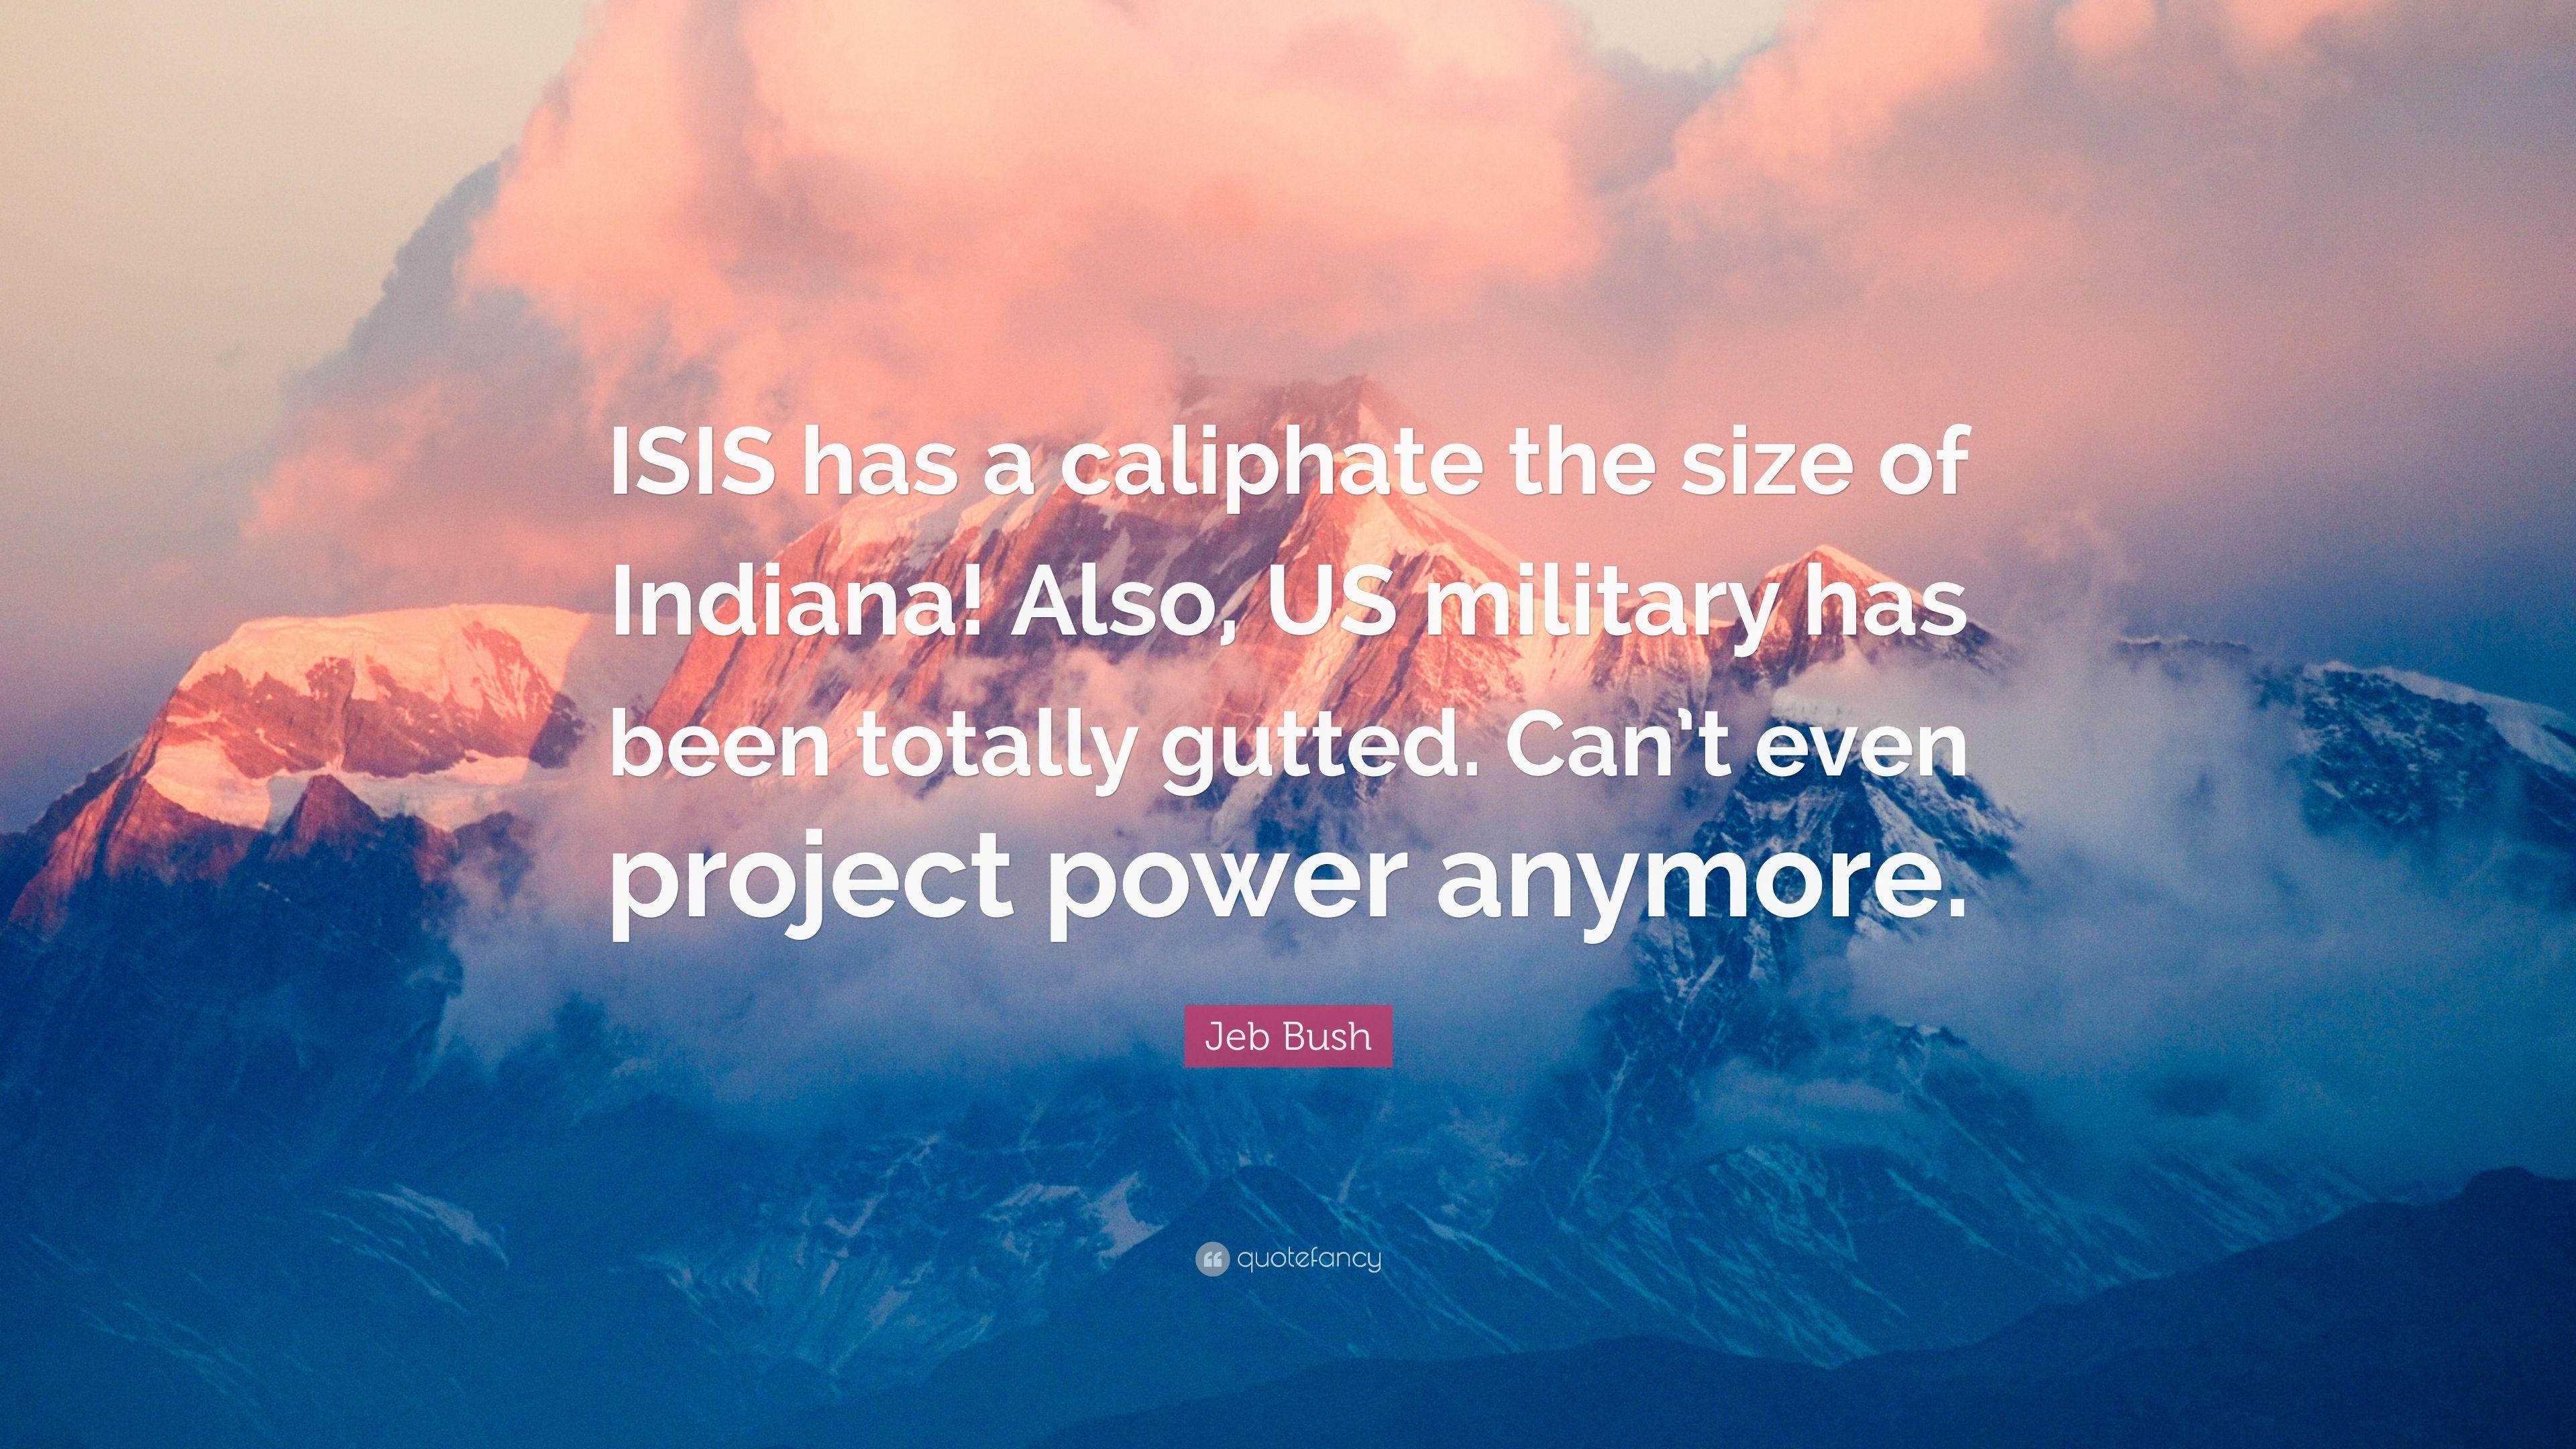 Jeb Bush Quote: “ISIS has a caliphate the size of Indiana! Also, US